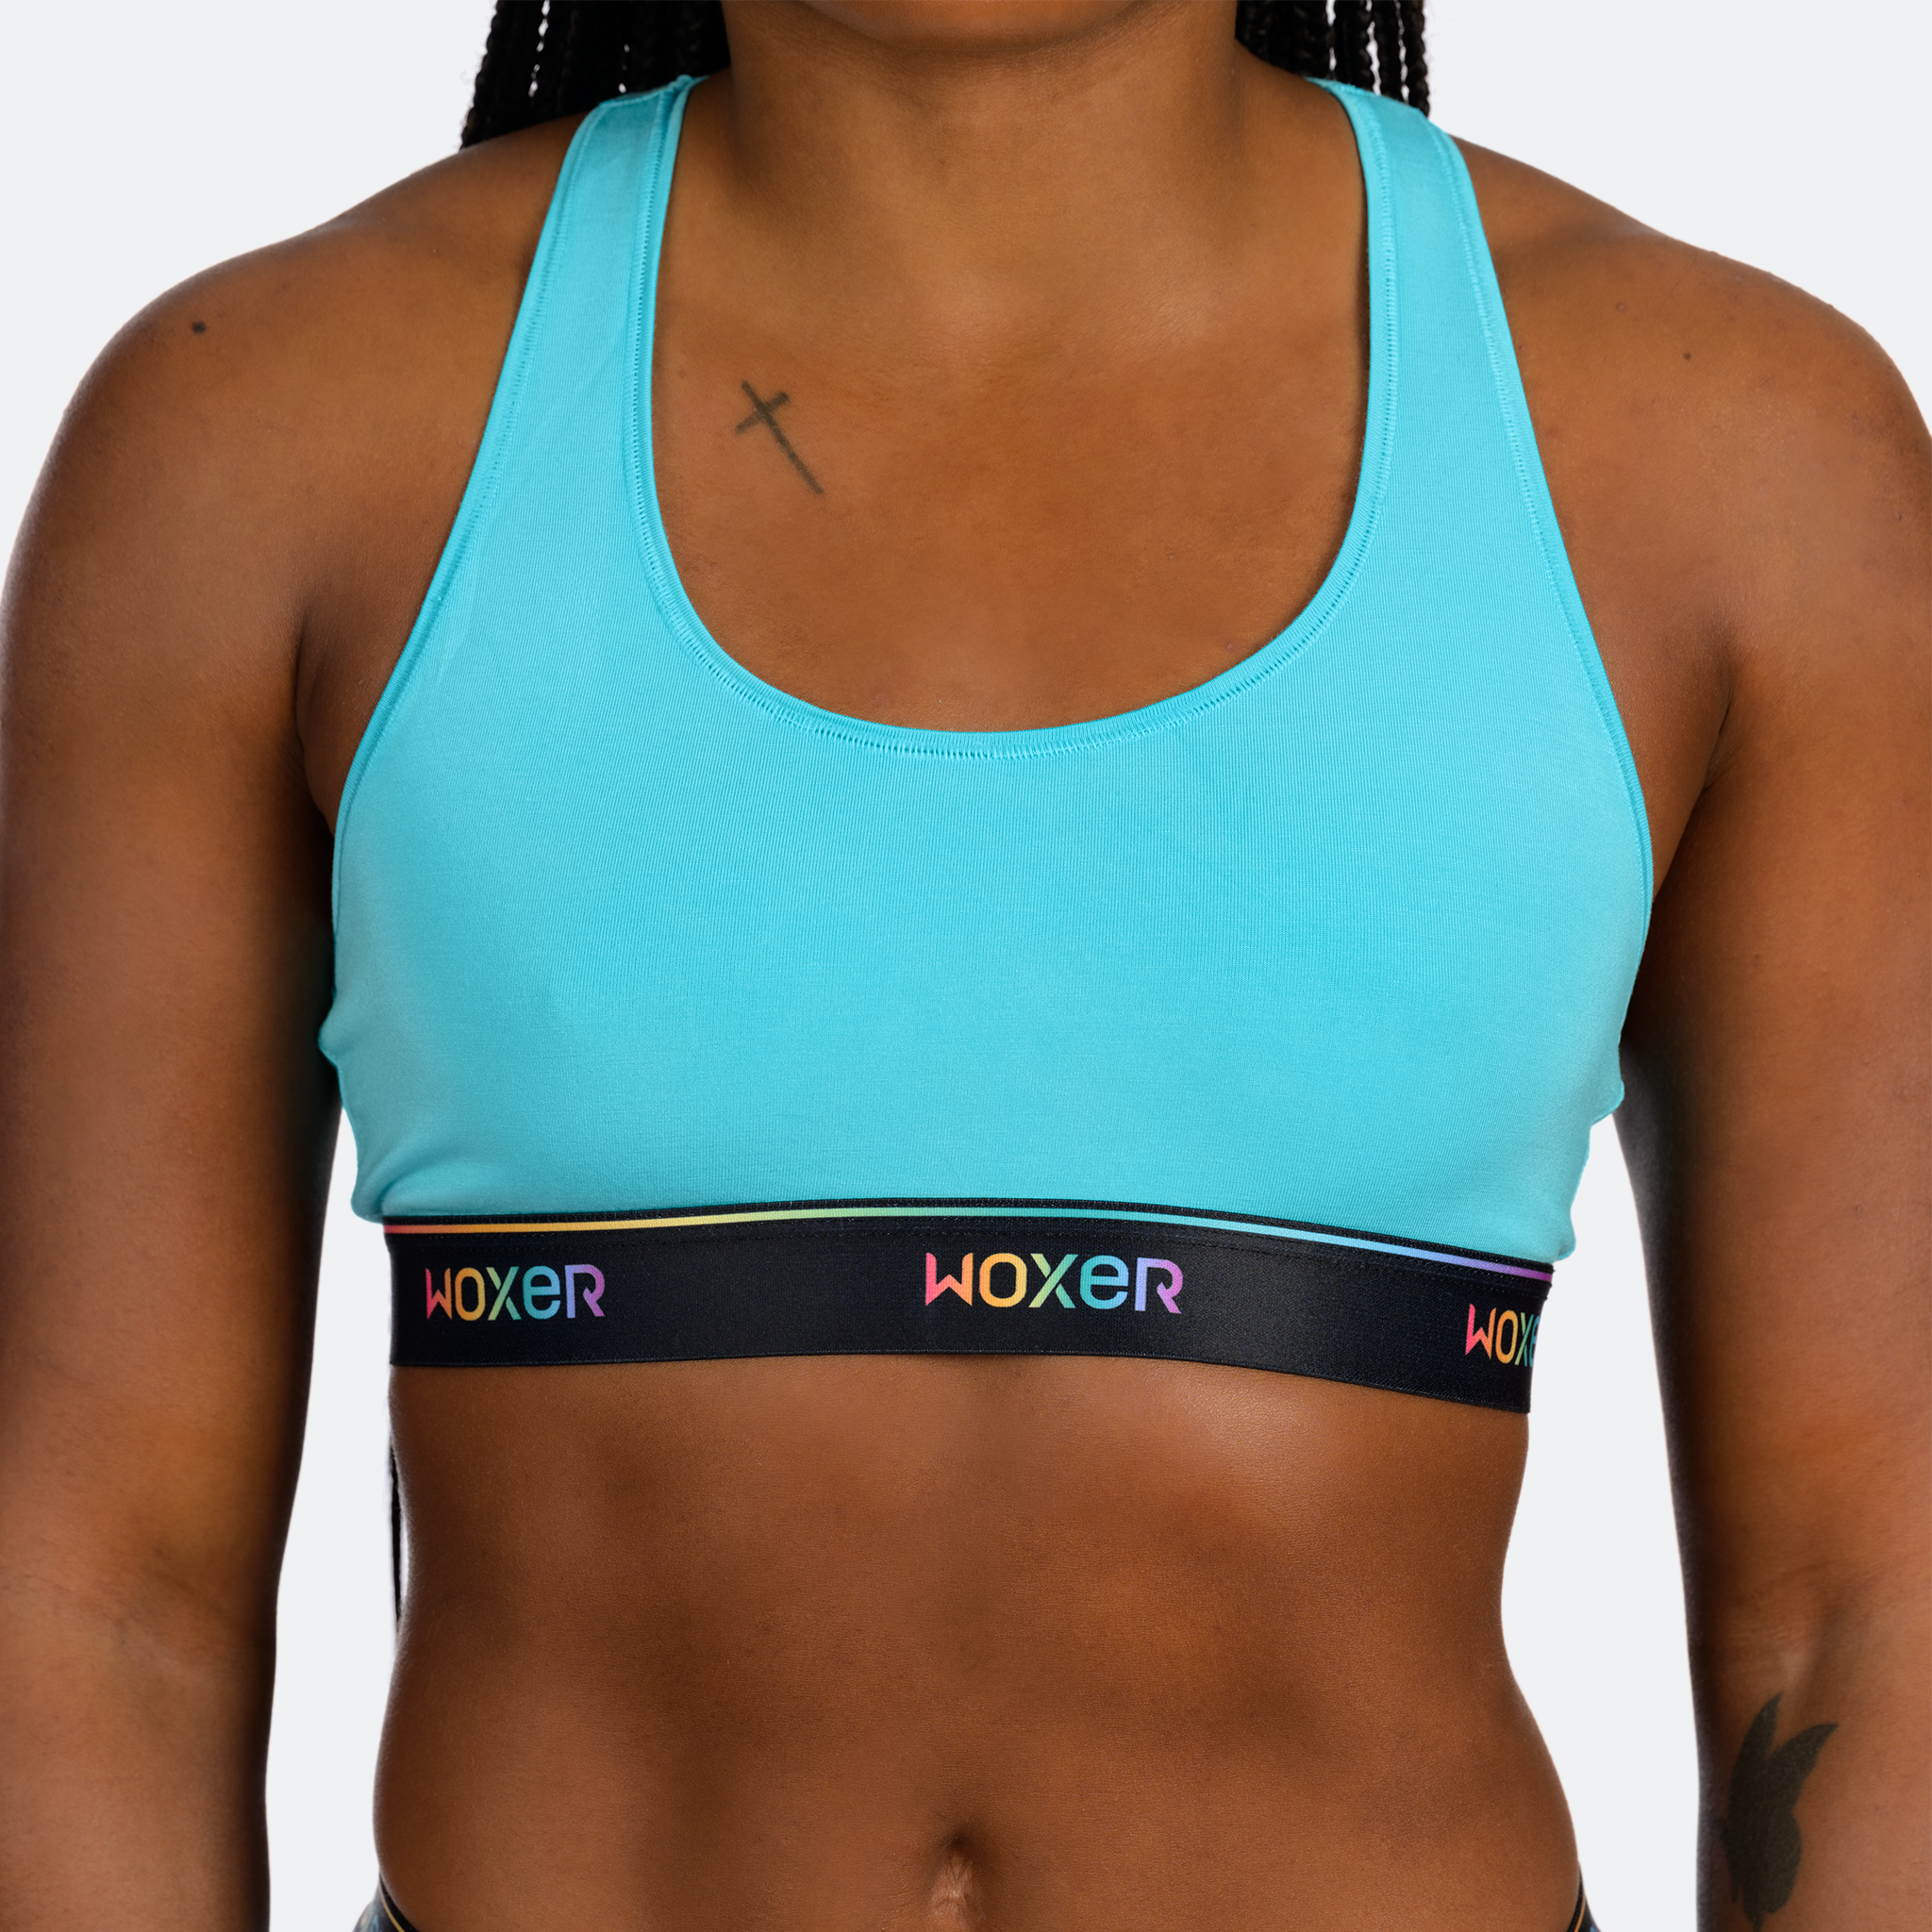 Boss Proudly Pride  10-Pack Proudly Pride Stretchy Sports Bras